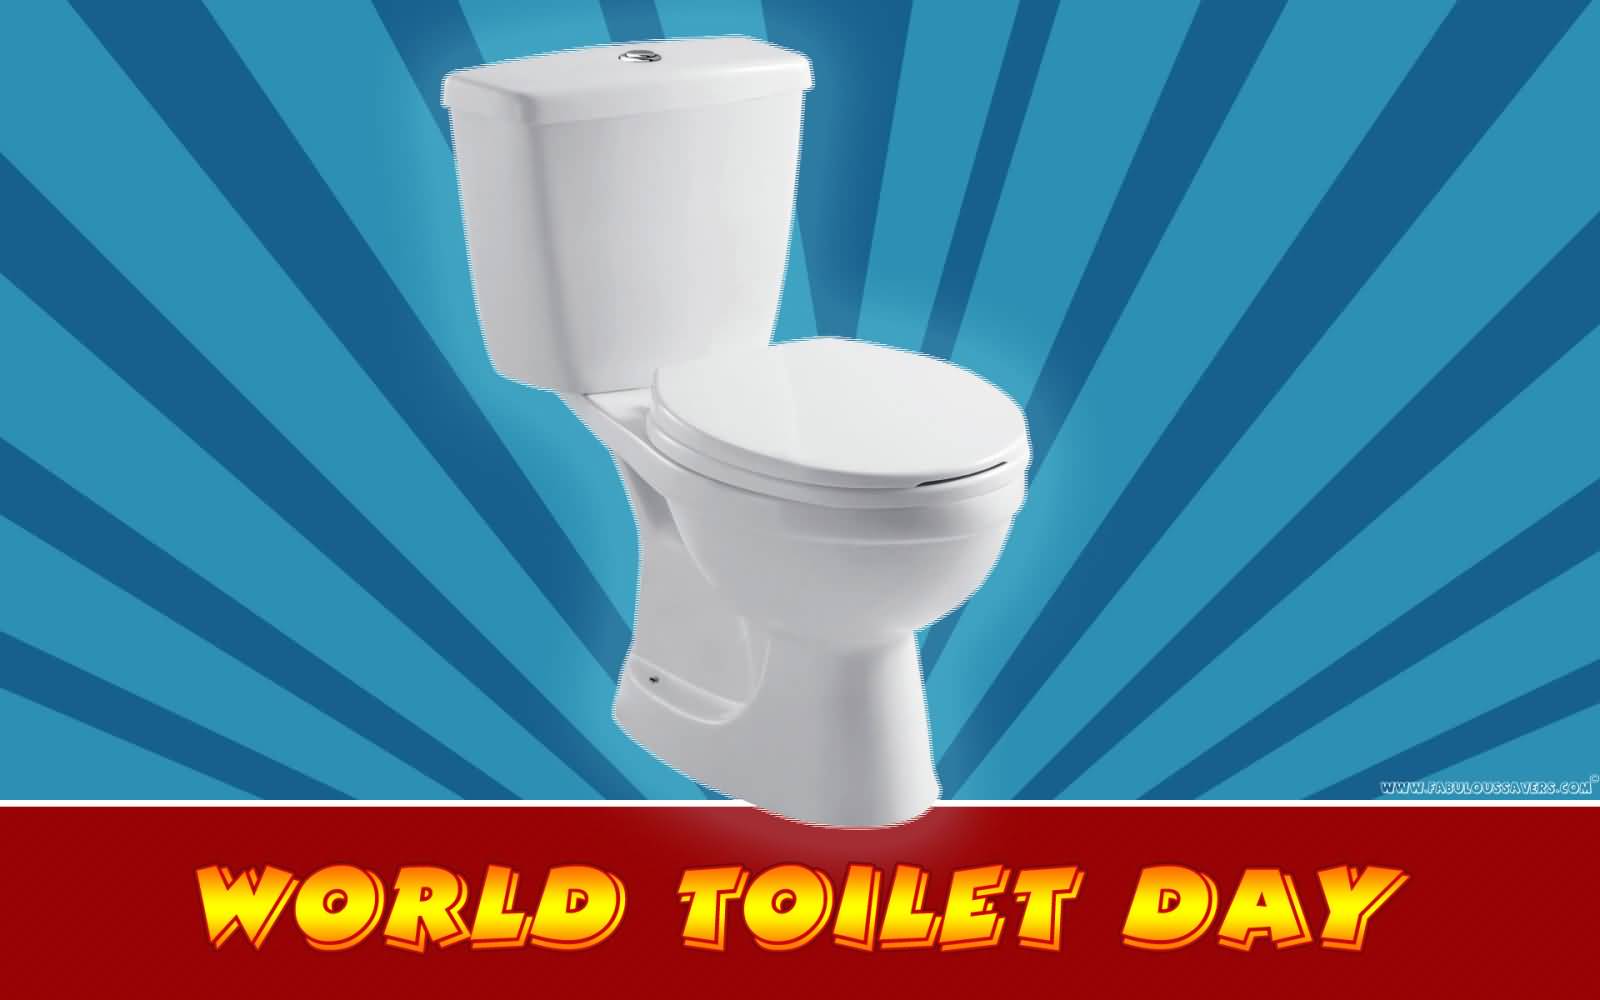 World Toilet Day Picture For Facebook